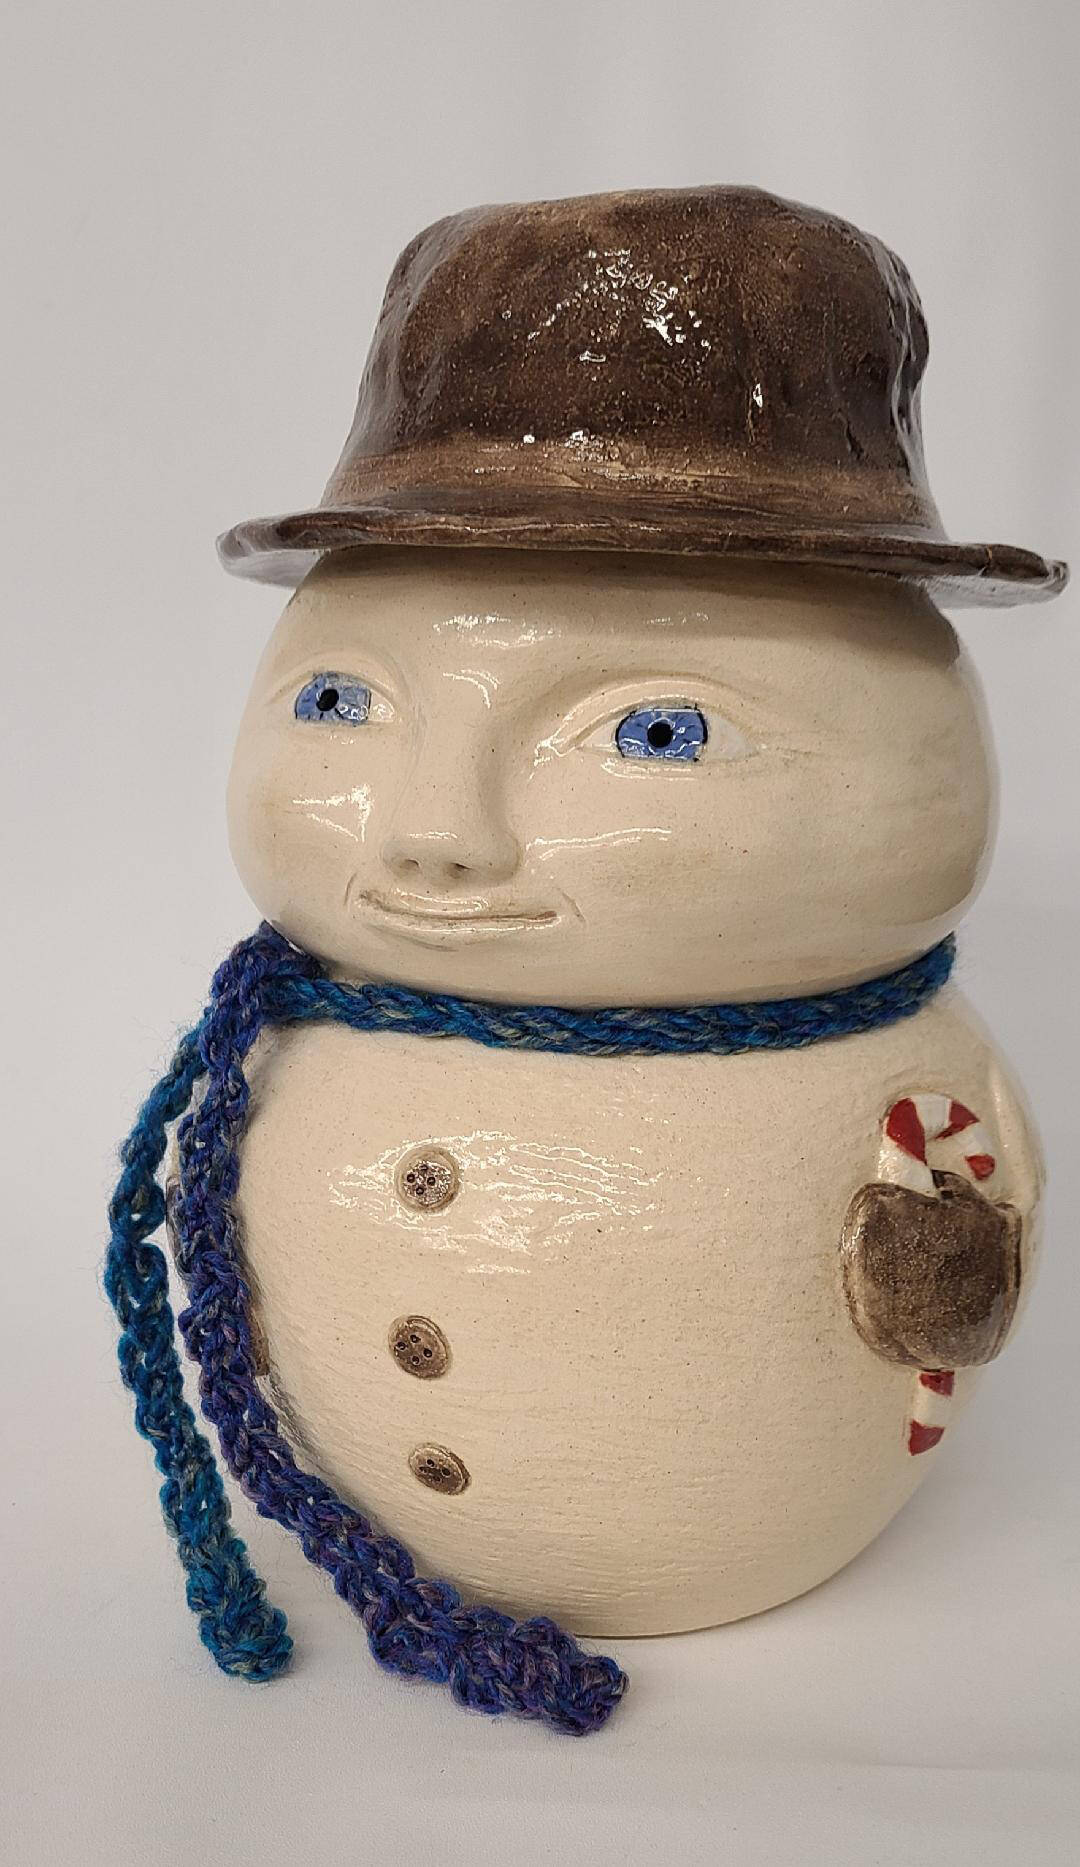 Photo courtesy of Blue Whole Gallery / “Snowman” ceramic by Janet Piccola.